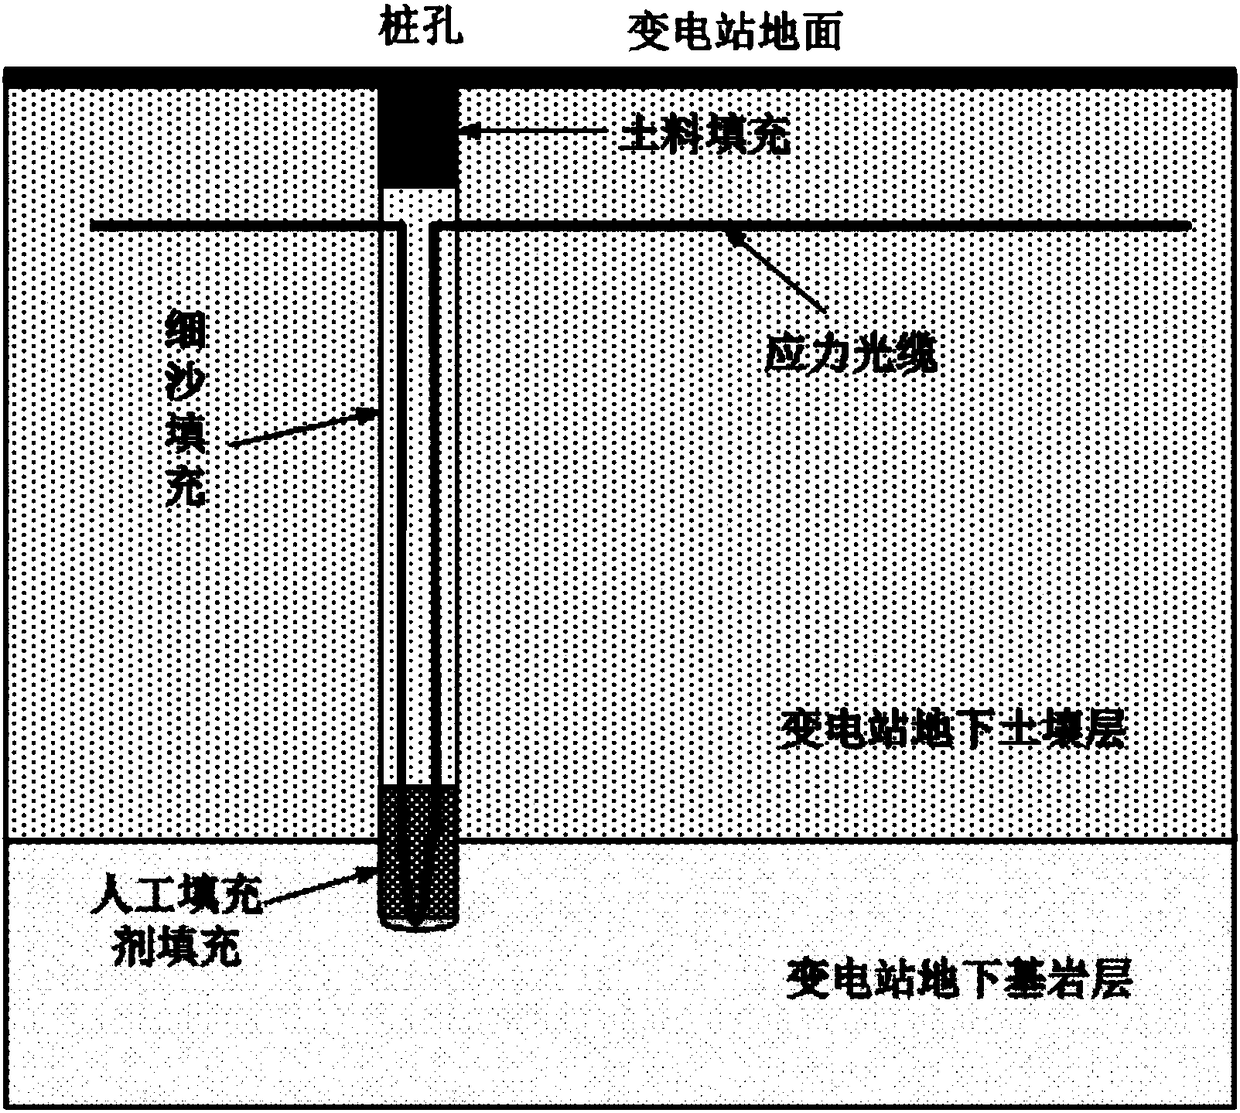 Stress optical cable underground laying and protection method used for transformer substation foundation displacement monitoring